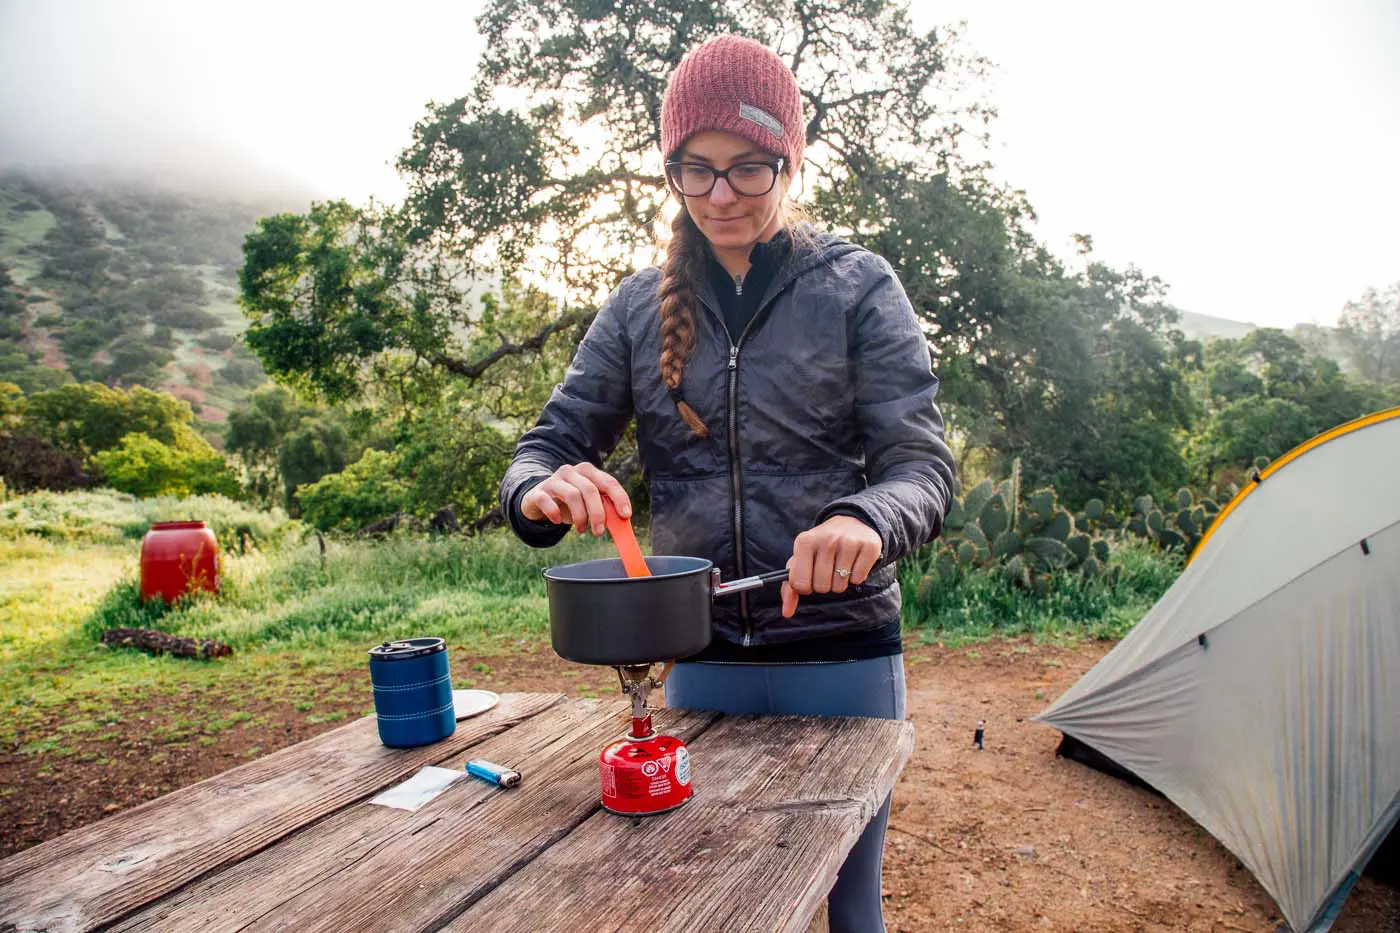 Woman cooking over a backpacking stove with a tent in the background.